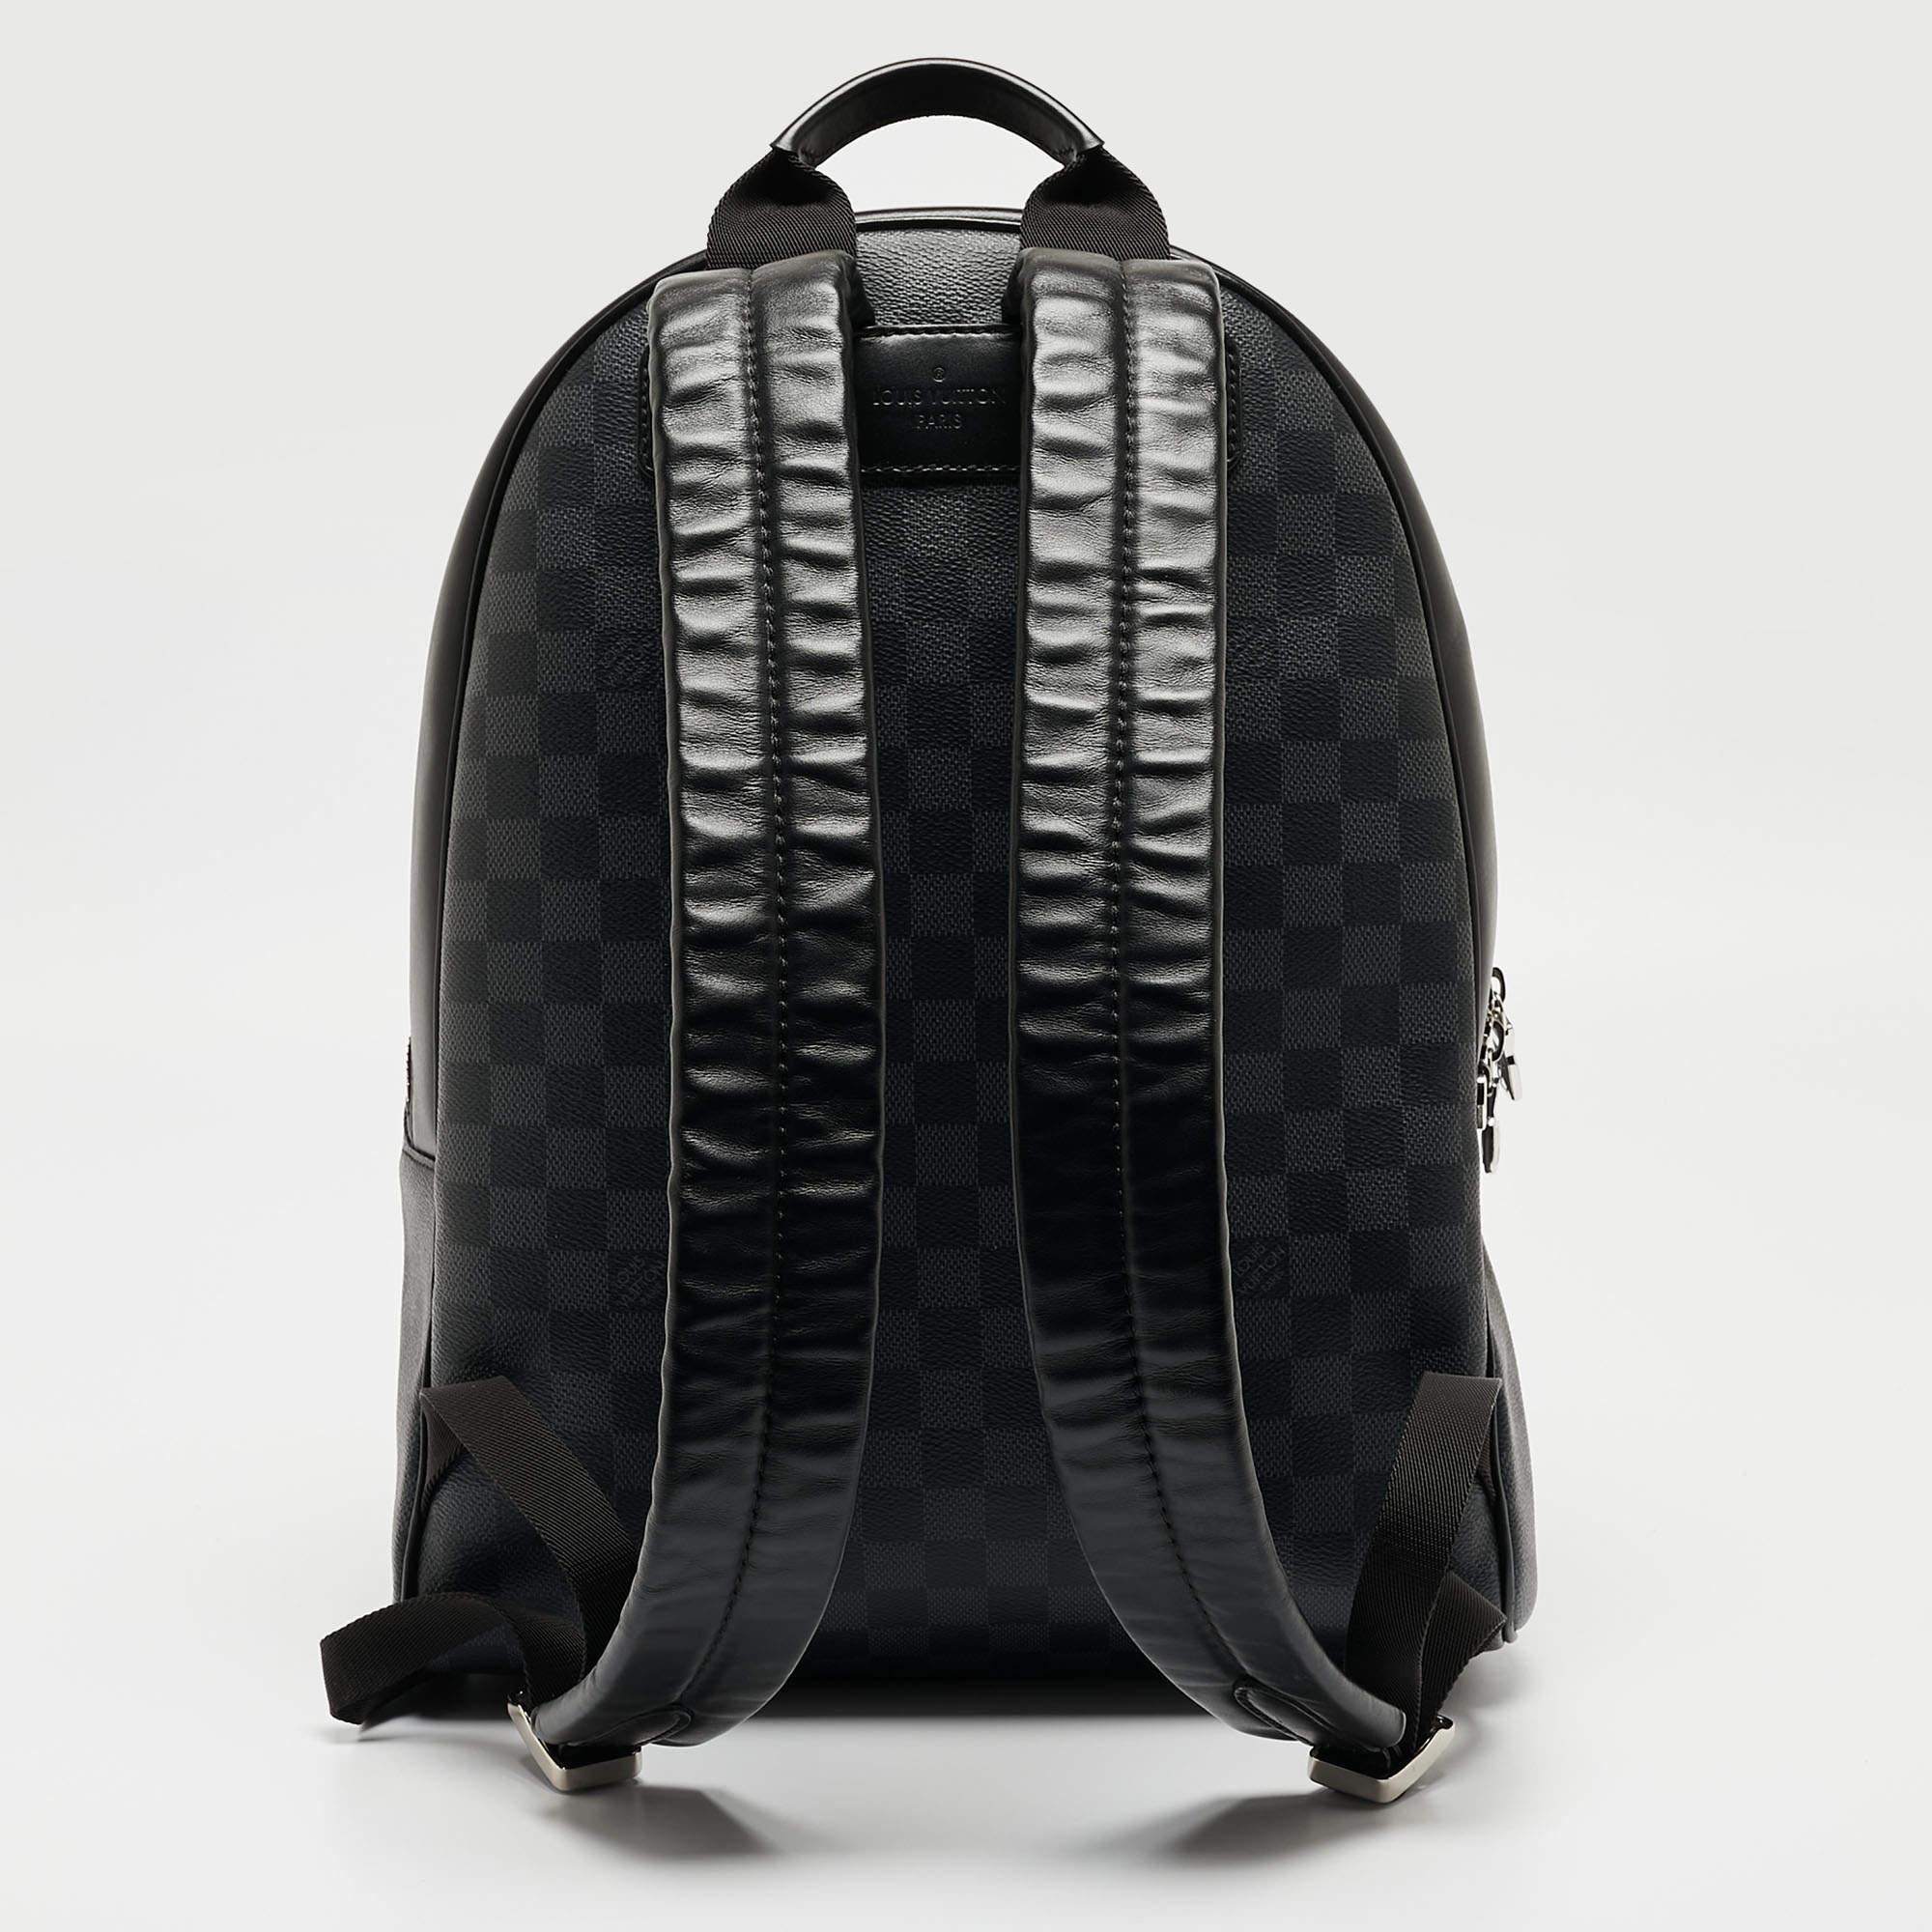 This stylish Josh backpack from Louis Vuitton is made from the signature Damier Graphite canvas and leather and is enhanced with a zipped pocket at the front. The bag features a top handle and two shoulder straps. It has a spacious interior that is